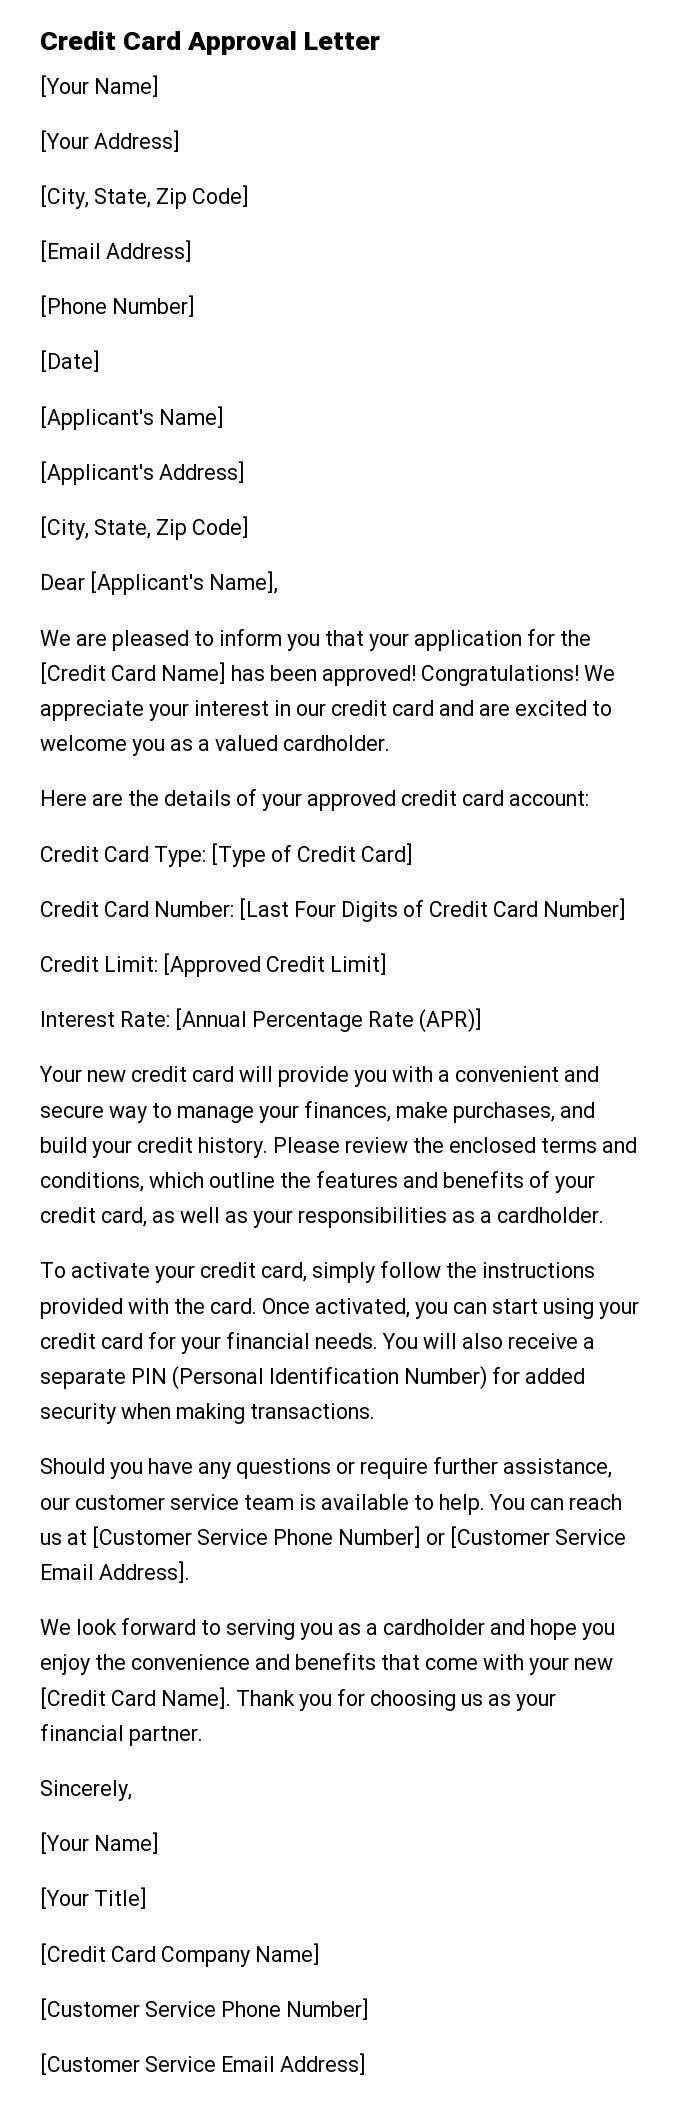 Credit Card Approval Letter